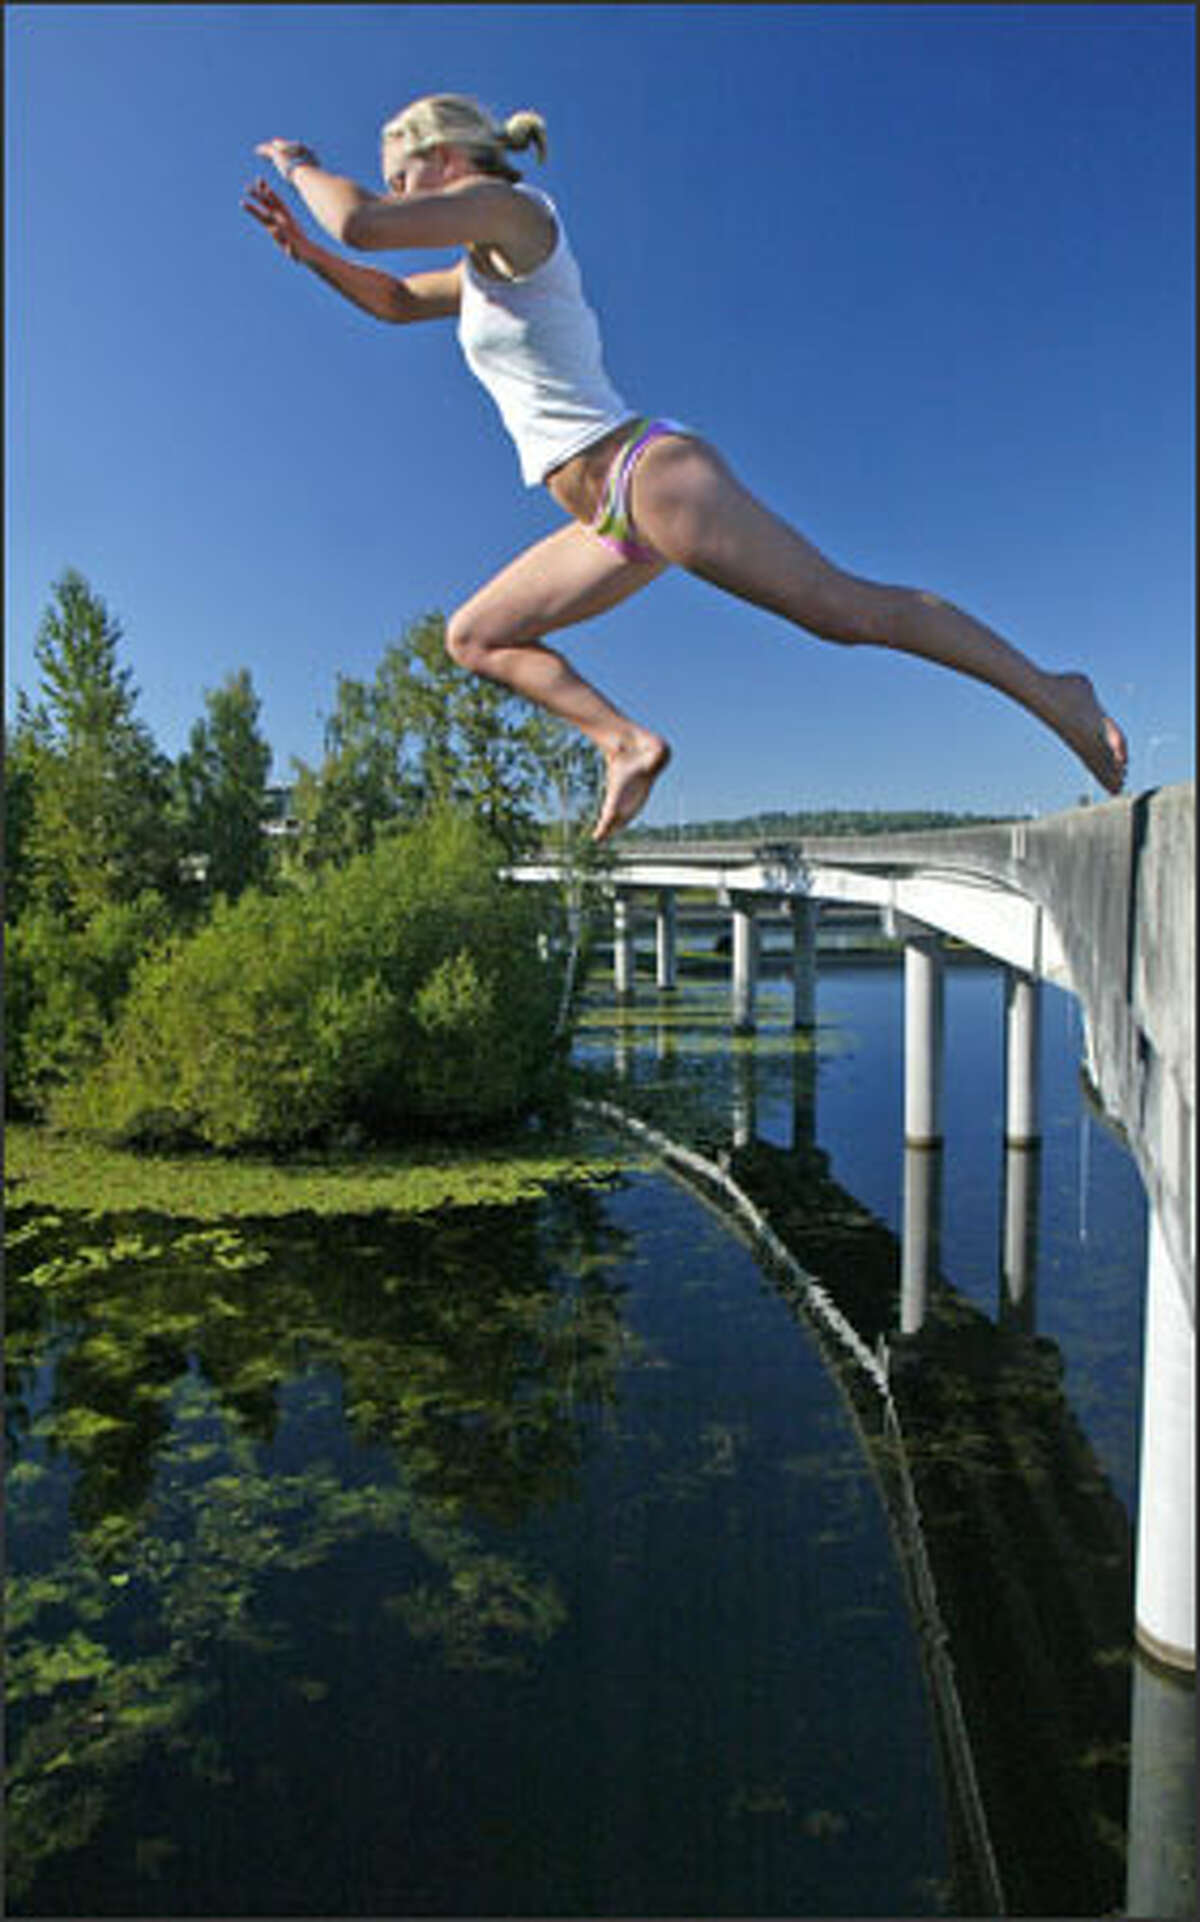 Alex Merrick takes a flying leap off a closed and unused section of the state Route 520 Bridge into the cool water of the Washington Park Arboretum below. The bridge is a perennially popular spot for people seeking relief from the heat after summer officially arrives.